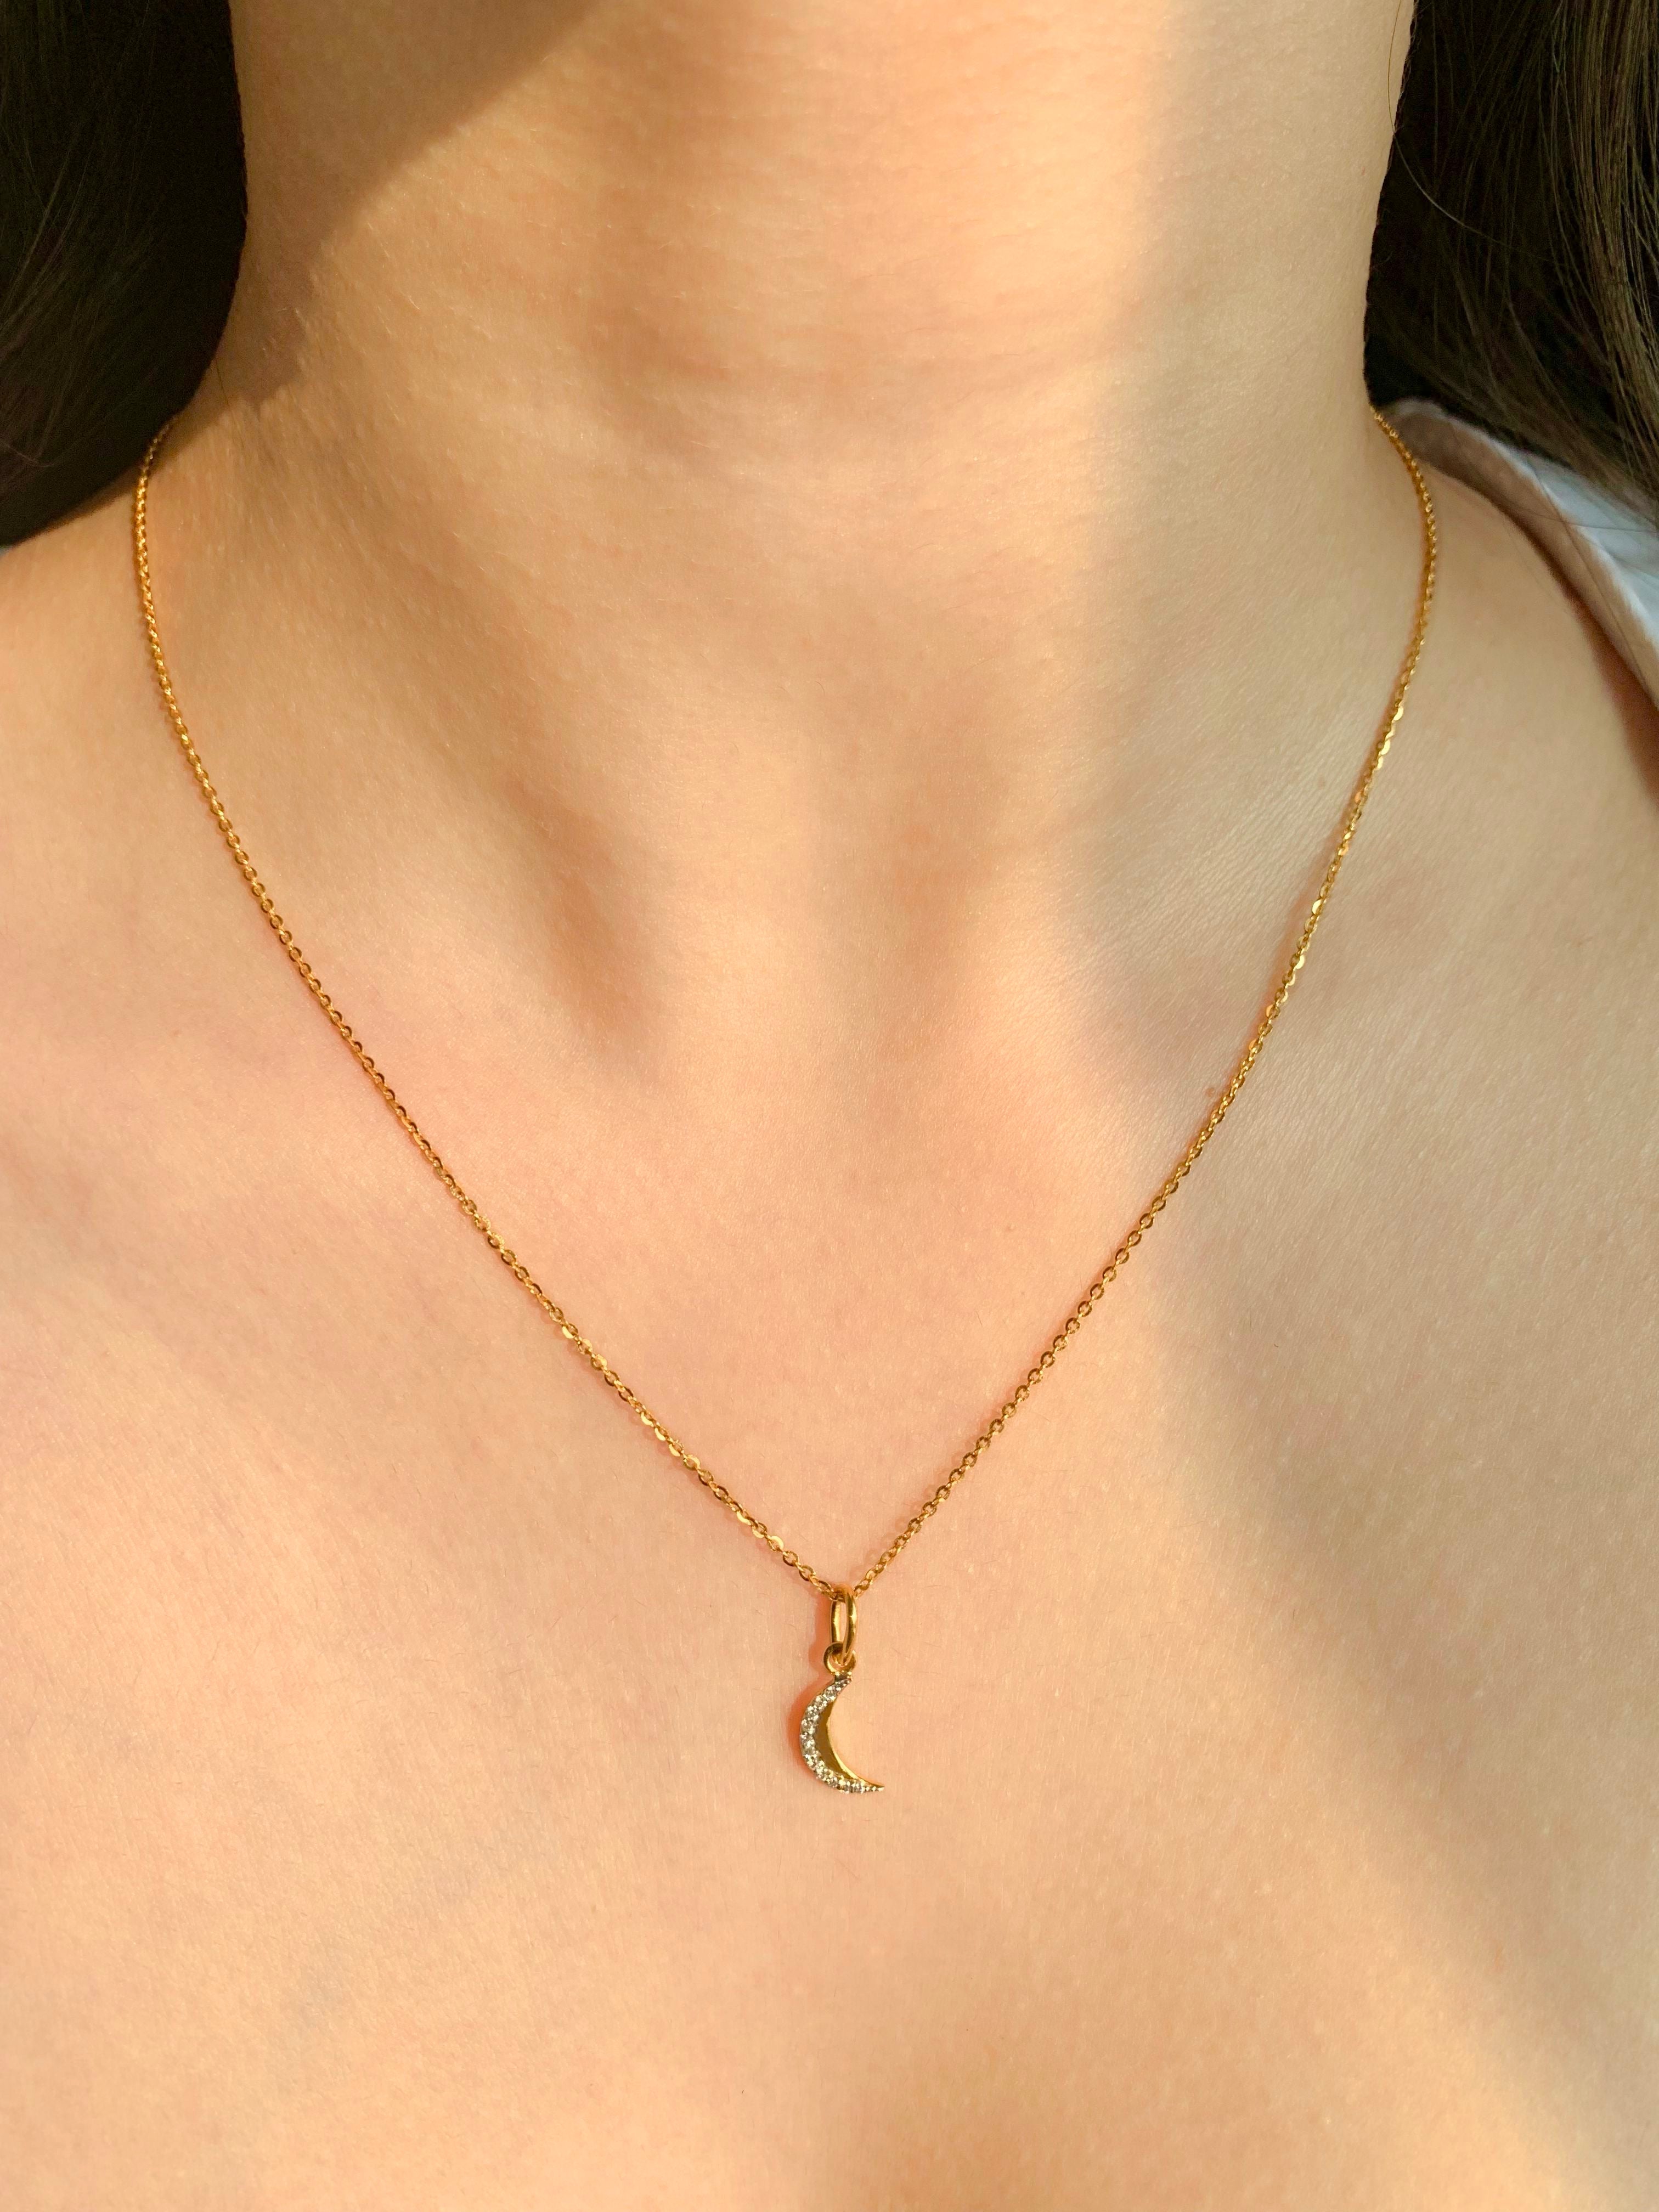 Crescent Moon Stevie Nicks Style Moon Necklace in Sterling Silver with 24K  Gold Overlay, Celestial Moon Necklaces, 18 inch Chain, Artisan